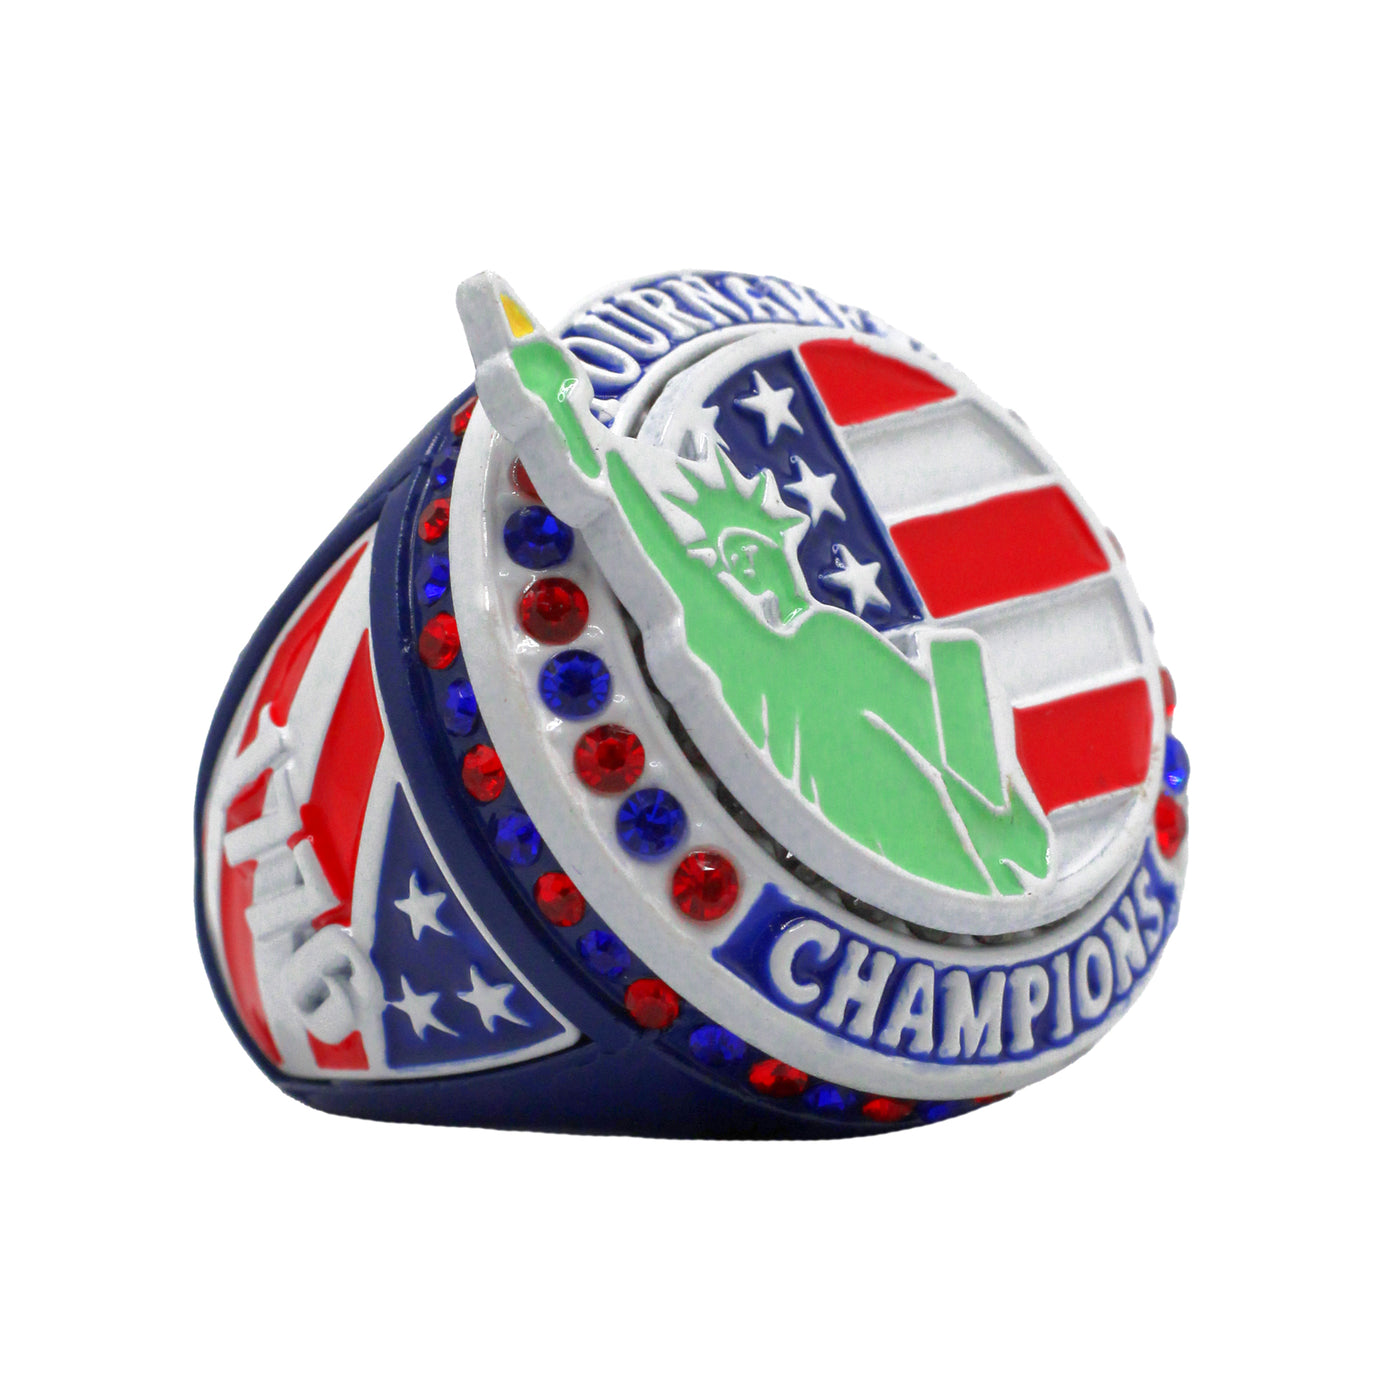 MEMORIAL DAY LADY LIBERTY TOURNAMENT CHAMPIONS RING